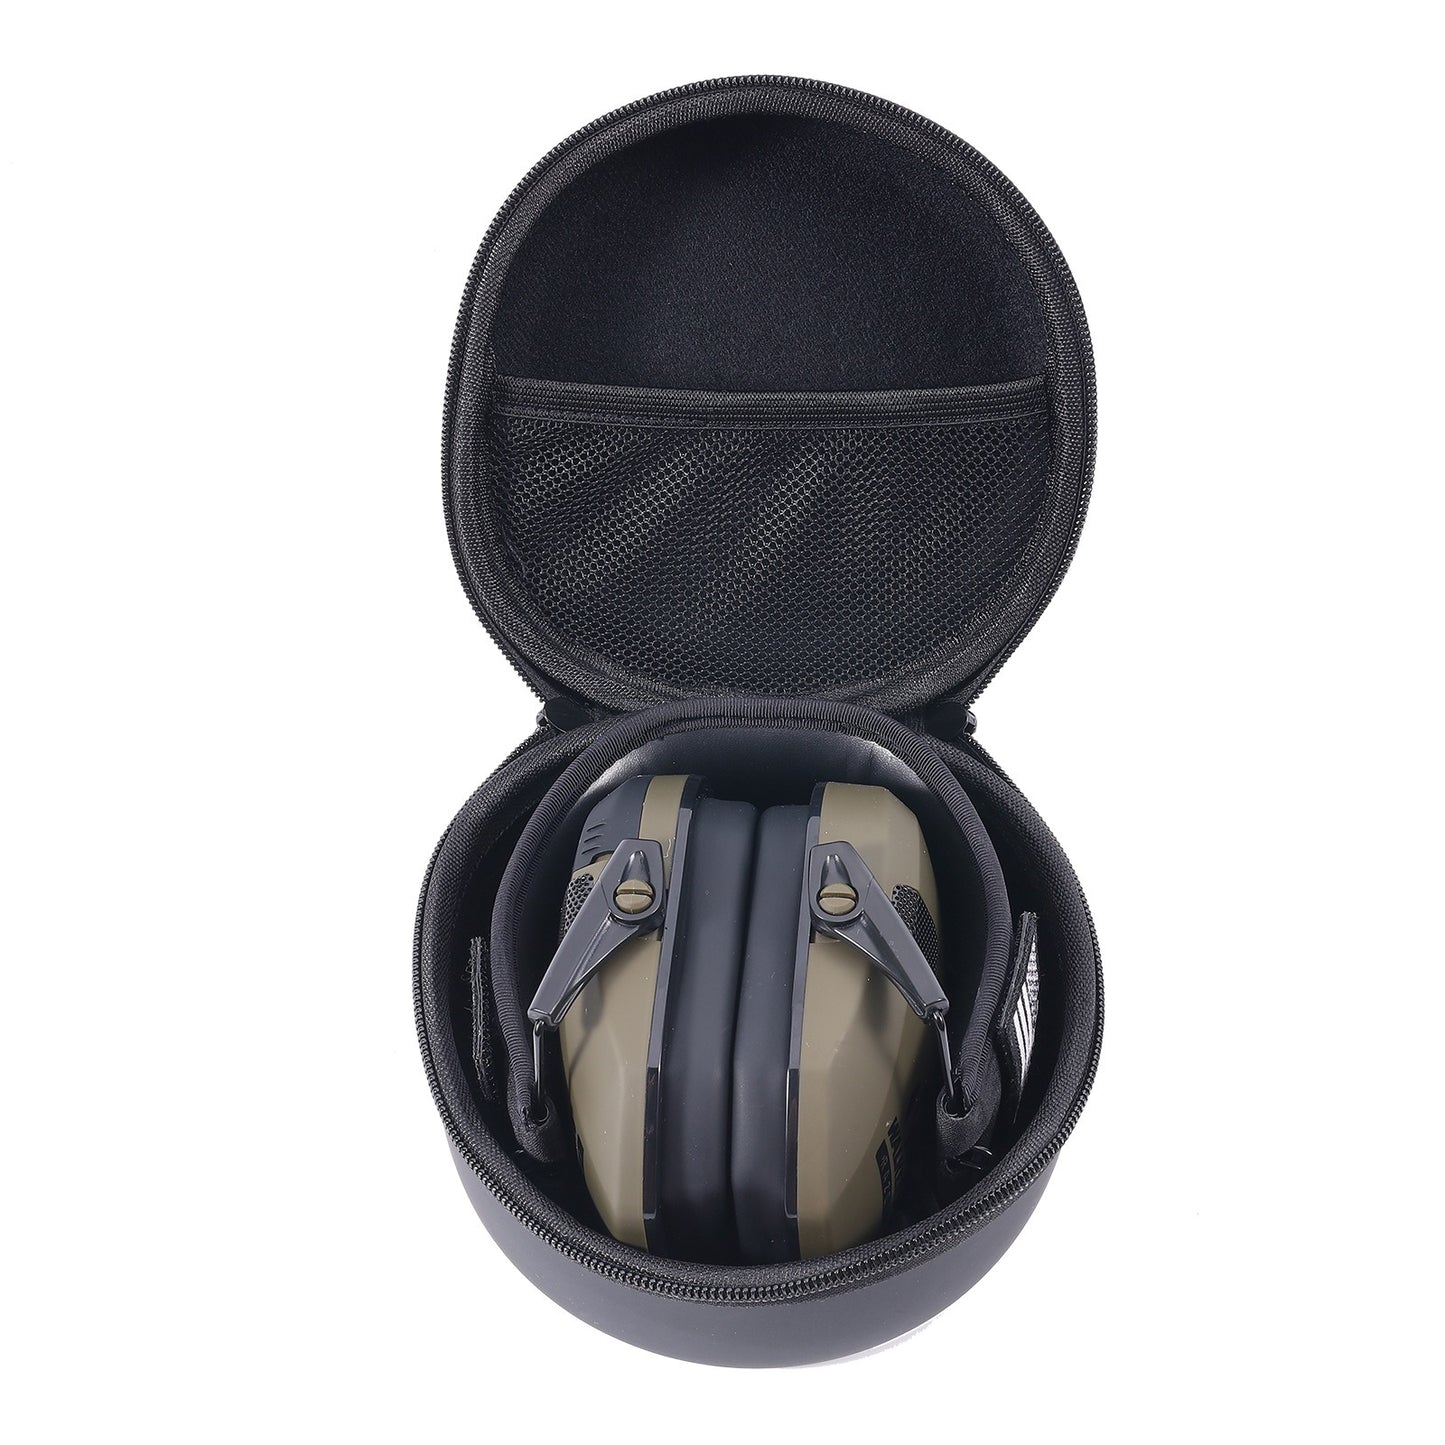 Tactical Hunting Electronic Shooting Earmuffs Anti-noise Headset Sound Amplification Impact Hearing Protection Headphone